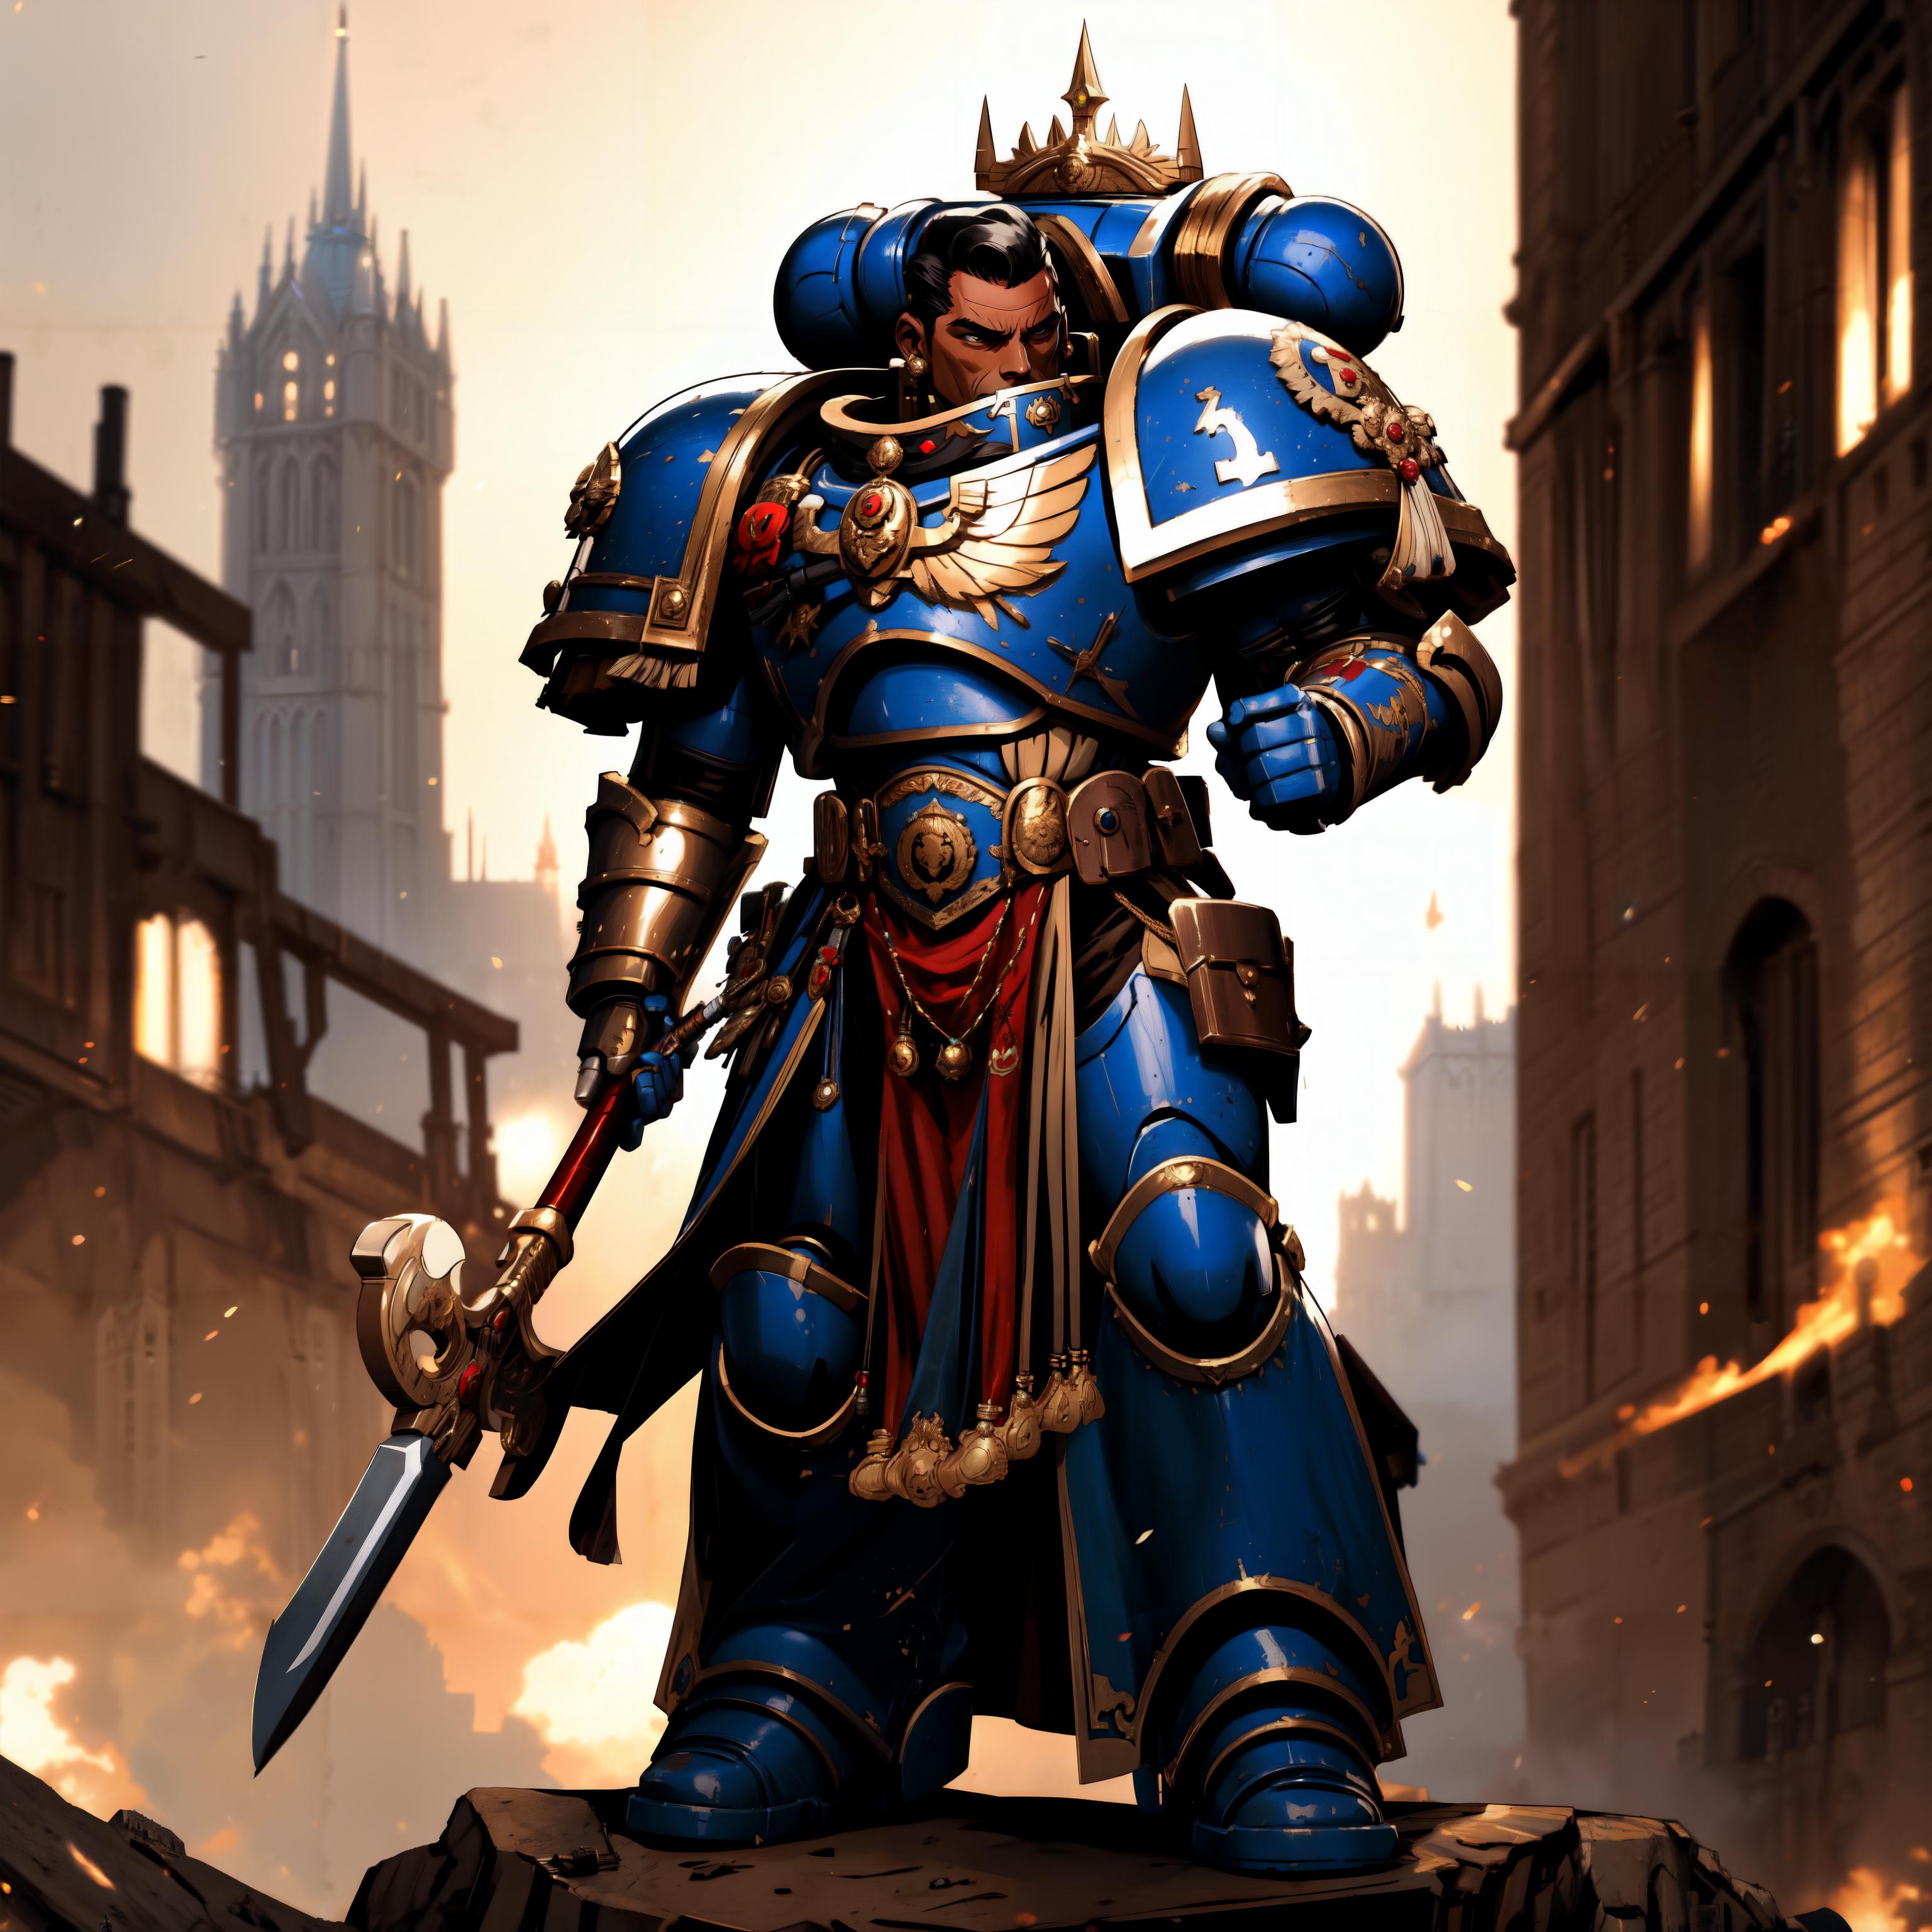 The Ultramarines image by Dercius